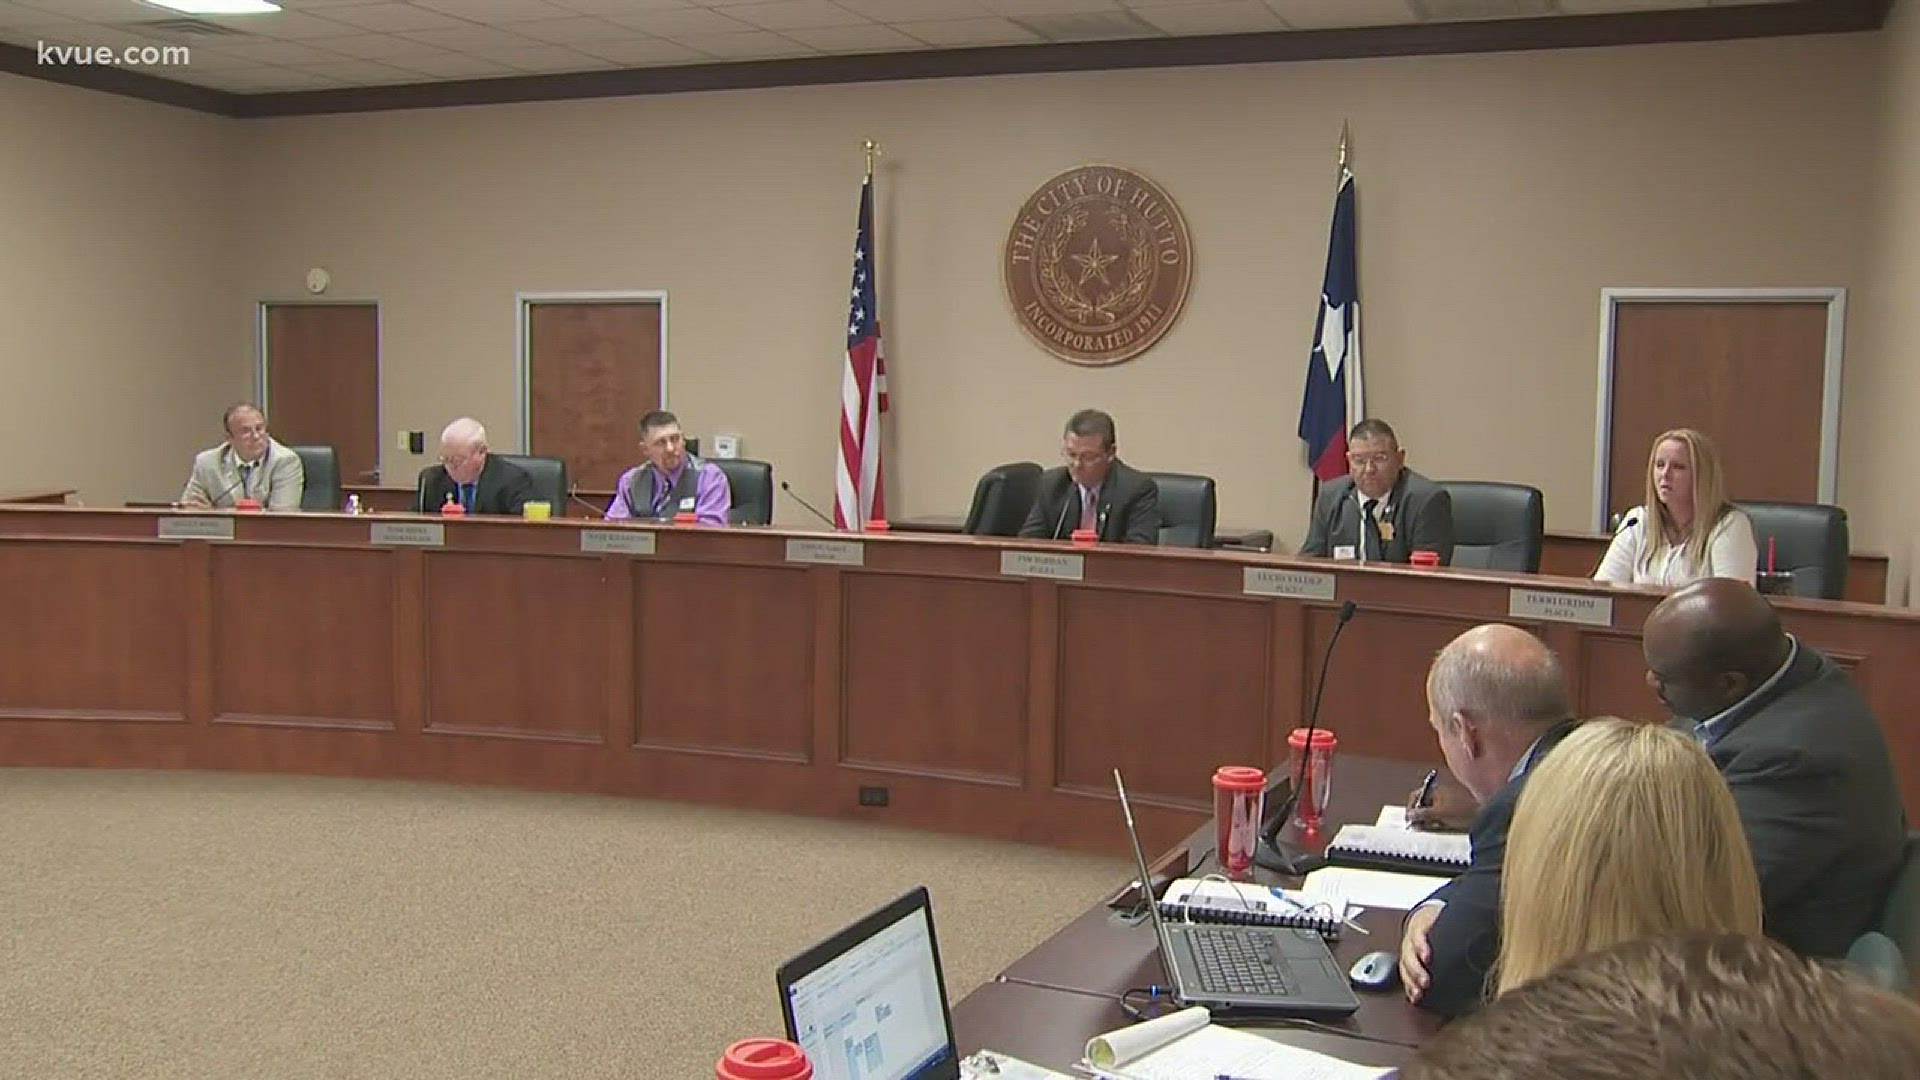 Council members made heated statements about the actions of a former board now under criminal investigation.